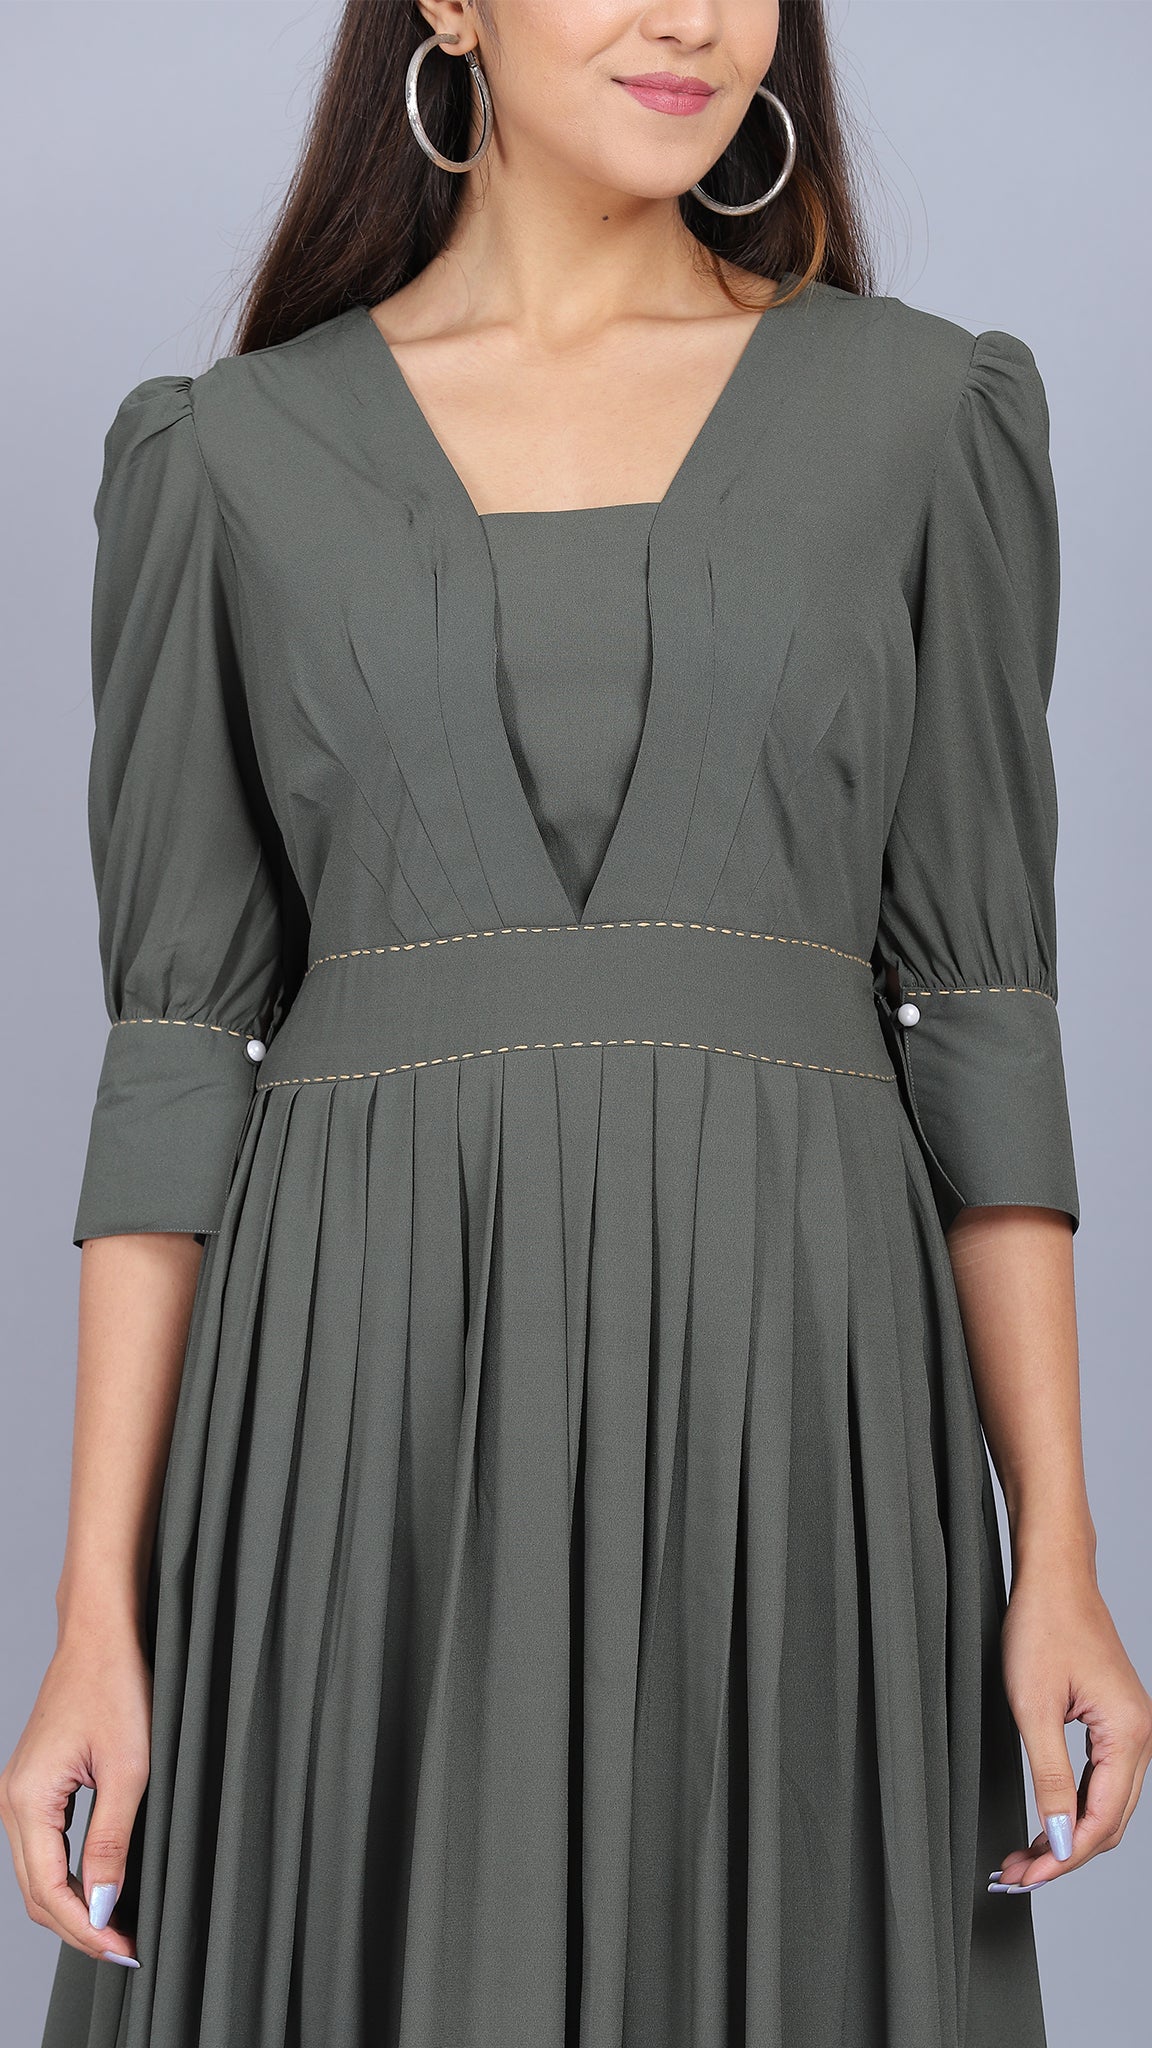 Olive Green Solid Empire Dress